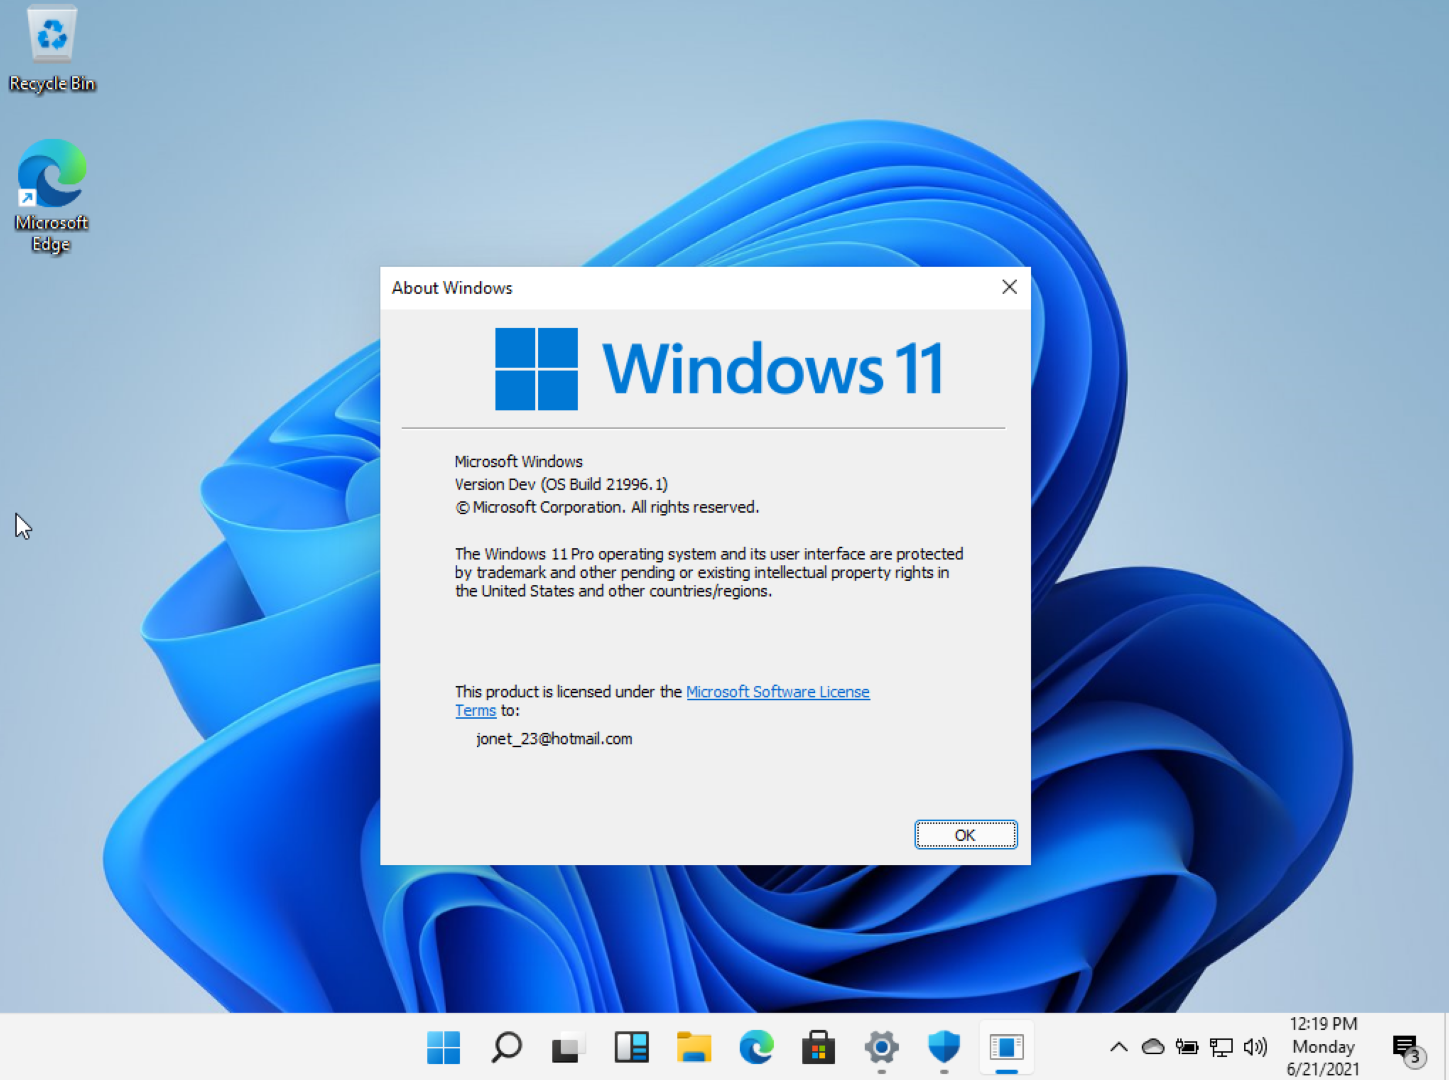 Windows 11 Tested The Next Windows Os After Windows 10